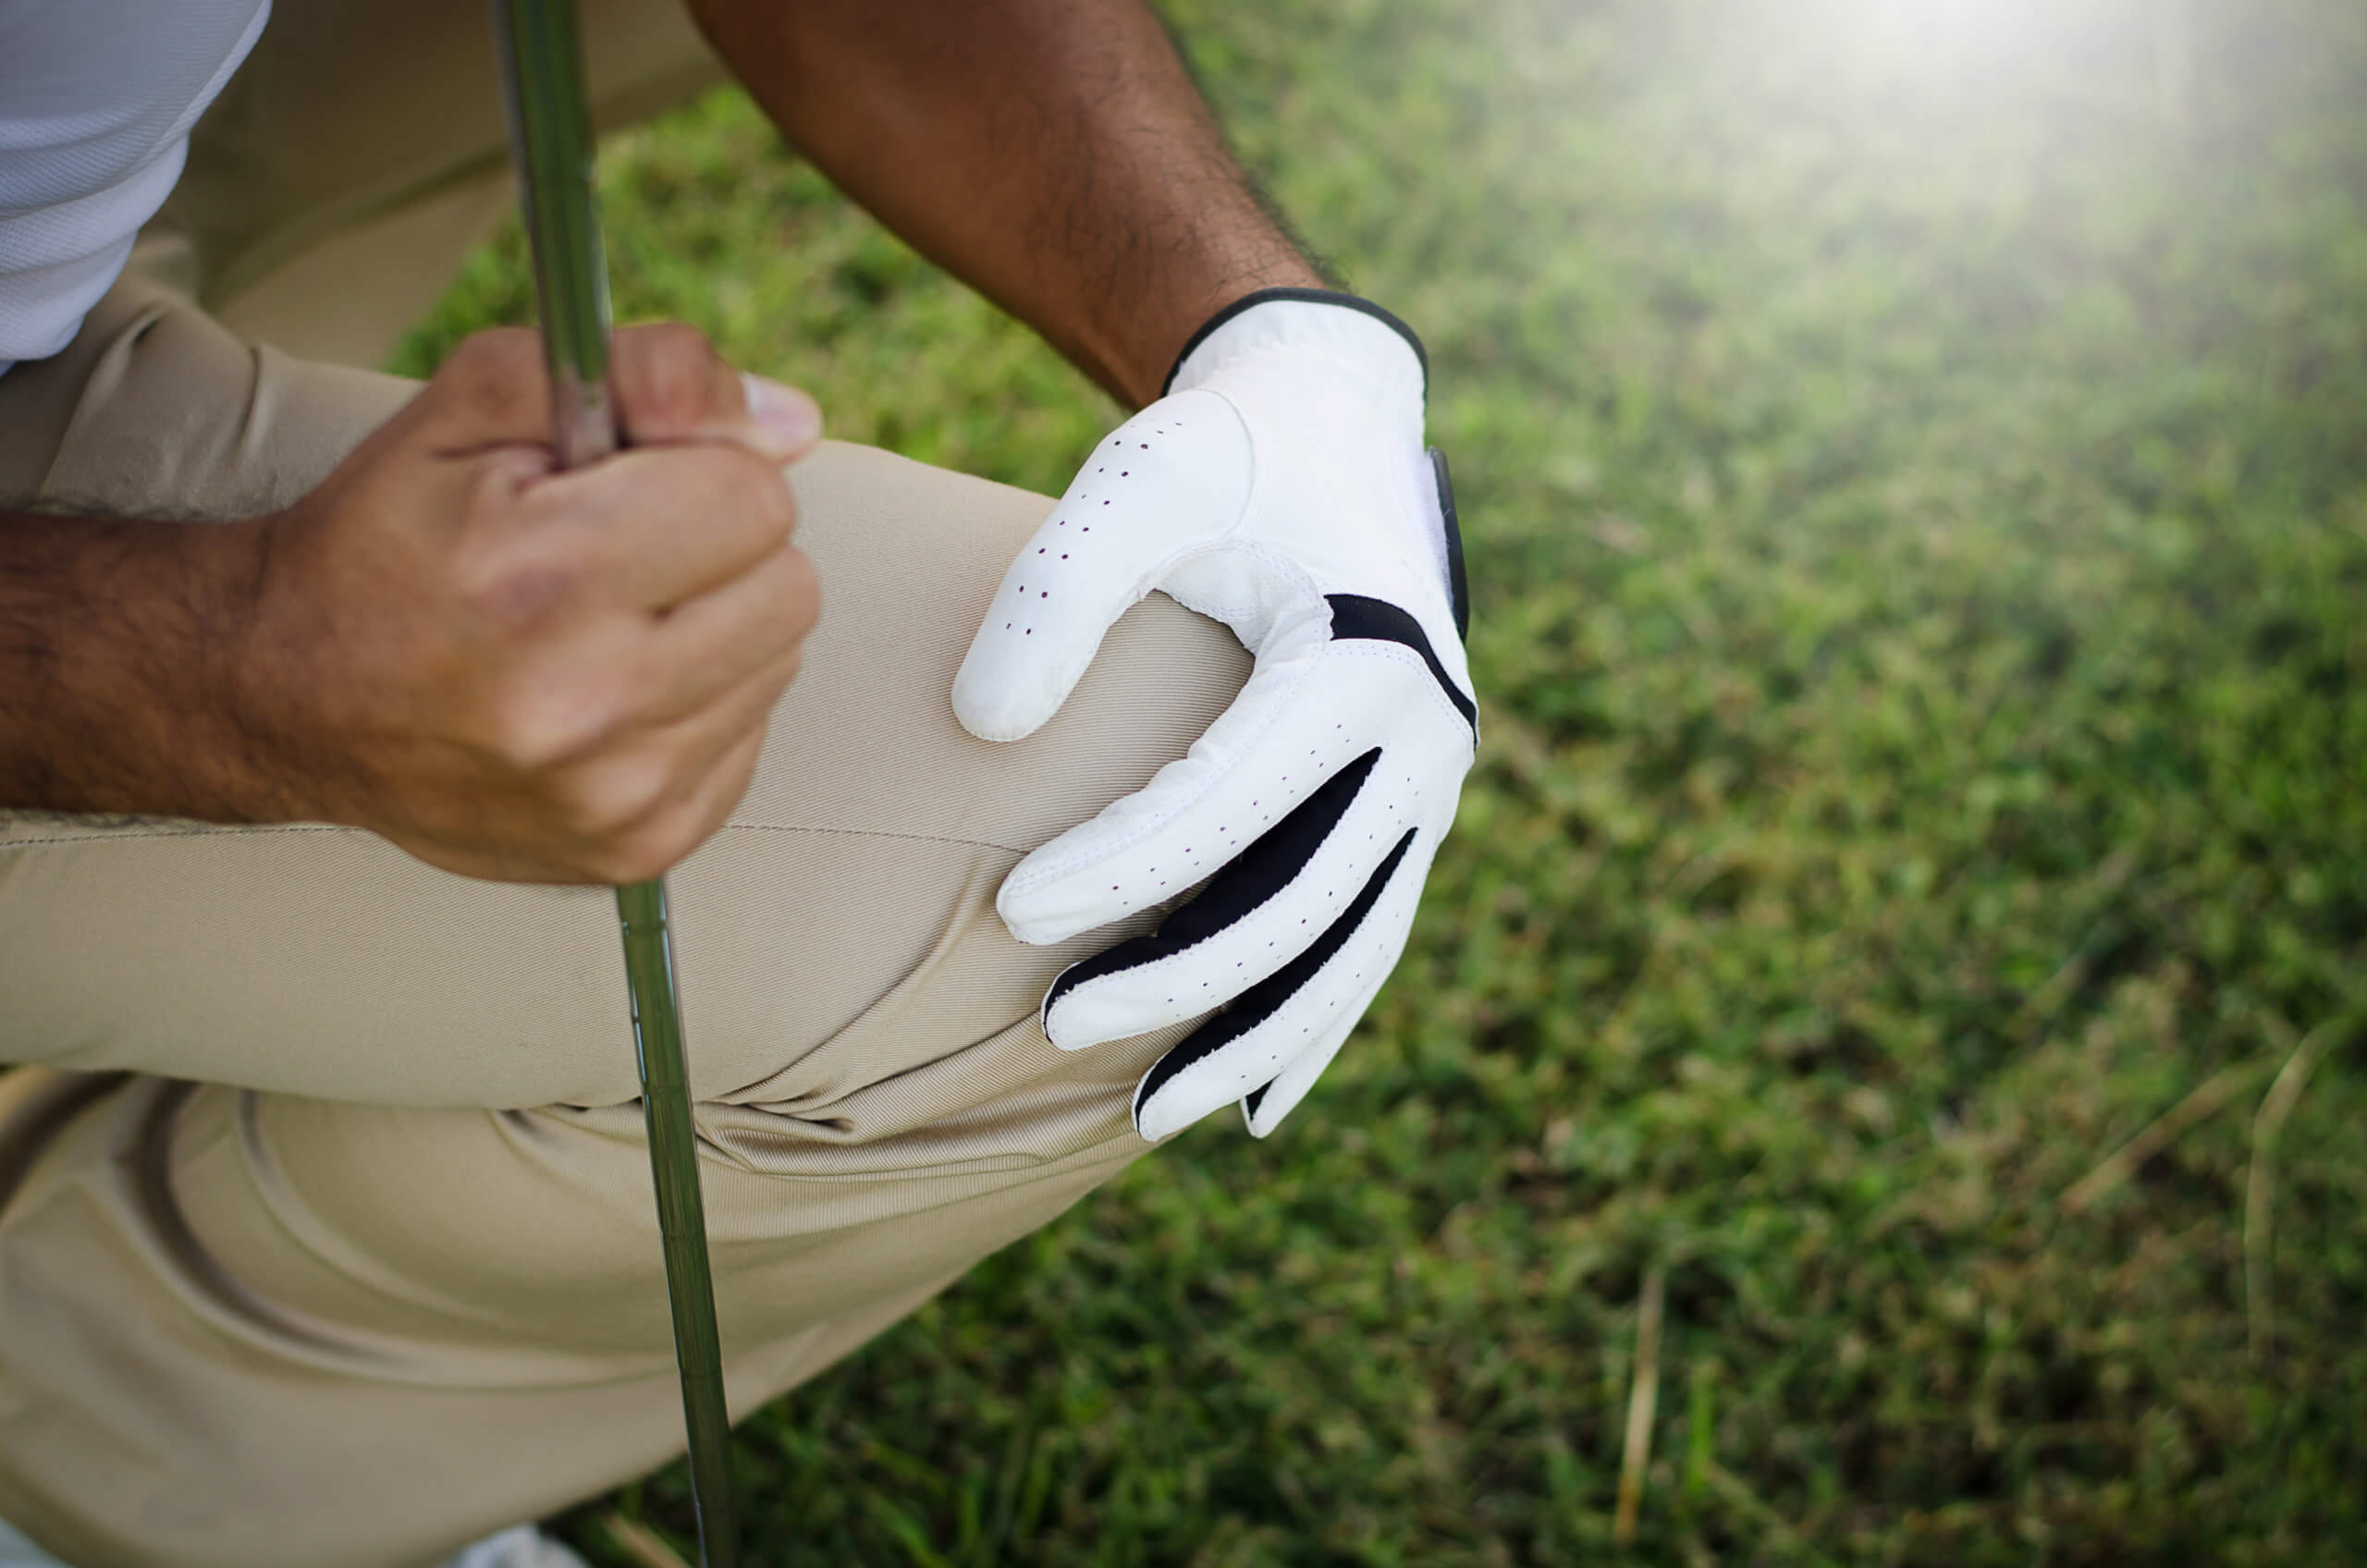  A male golfer crouches down in the grass, holding a club with one hand and his knee with the other. 